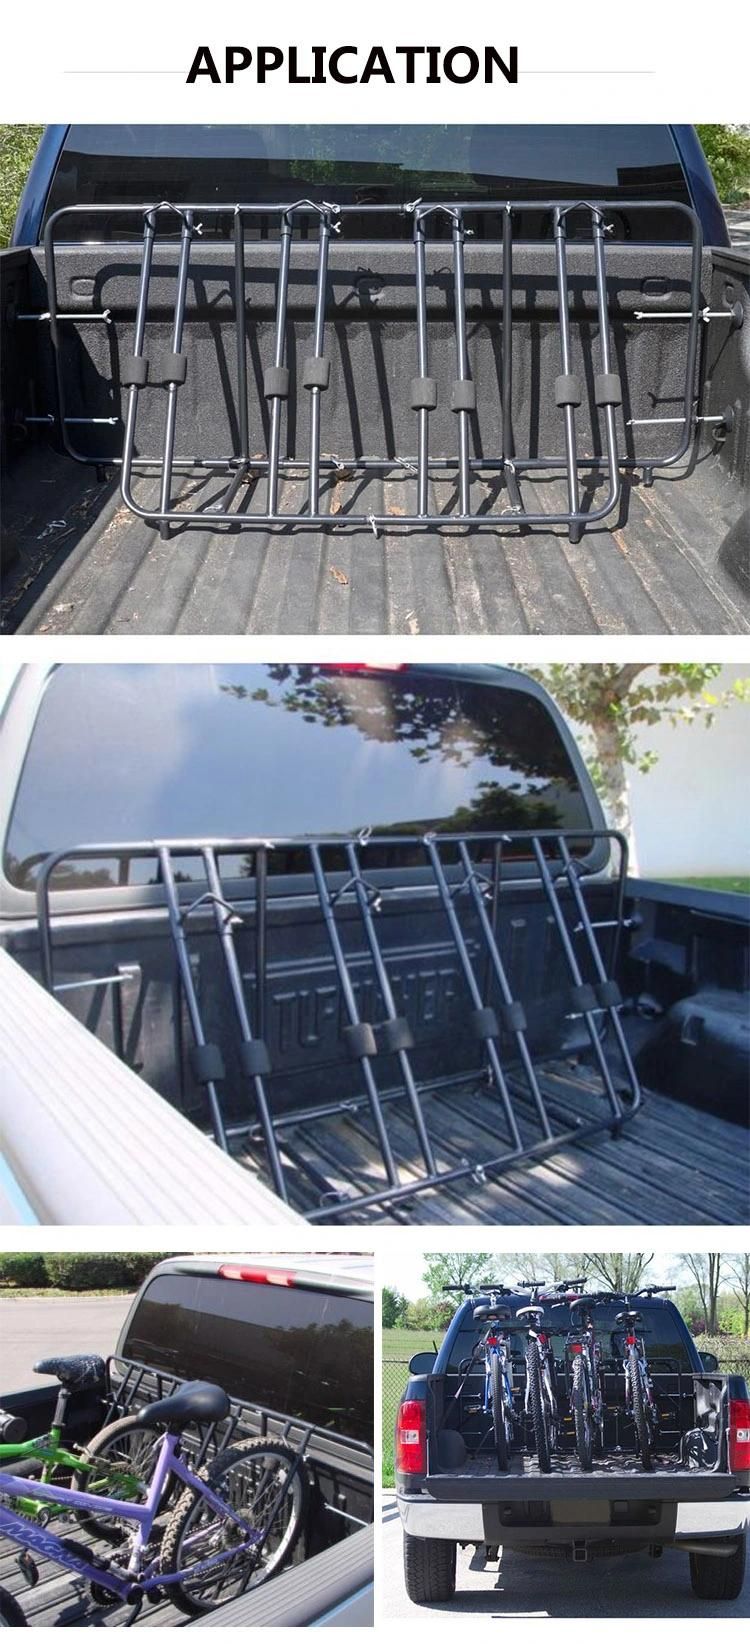 Steel Delivery Bicycles Bike Car Cycle Stand Trunk Bike Rack Bus Transport for Truck Carrier 4 Bicycle